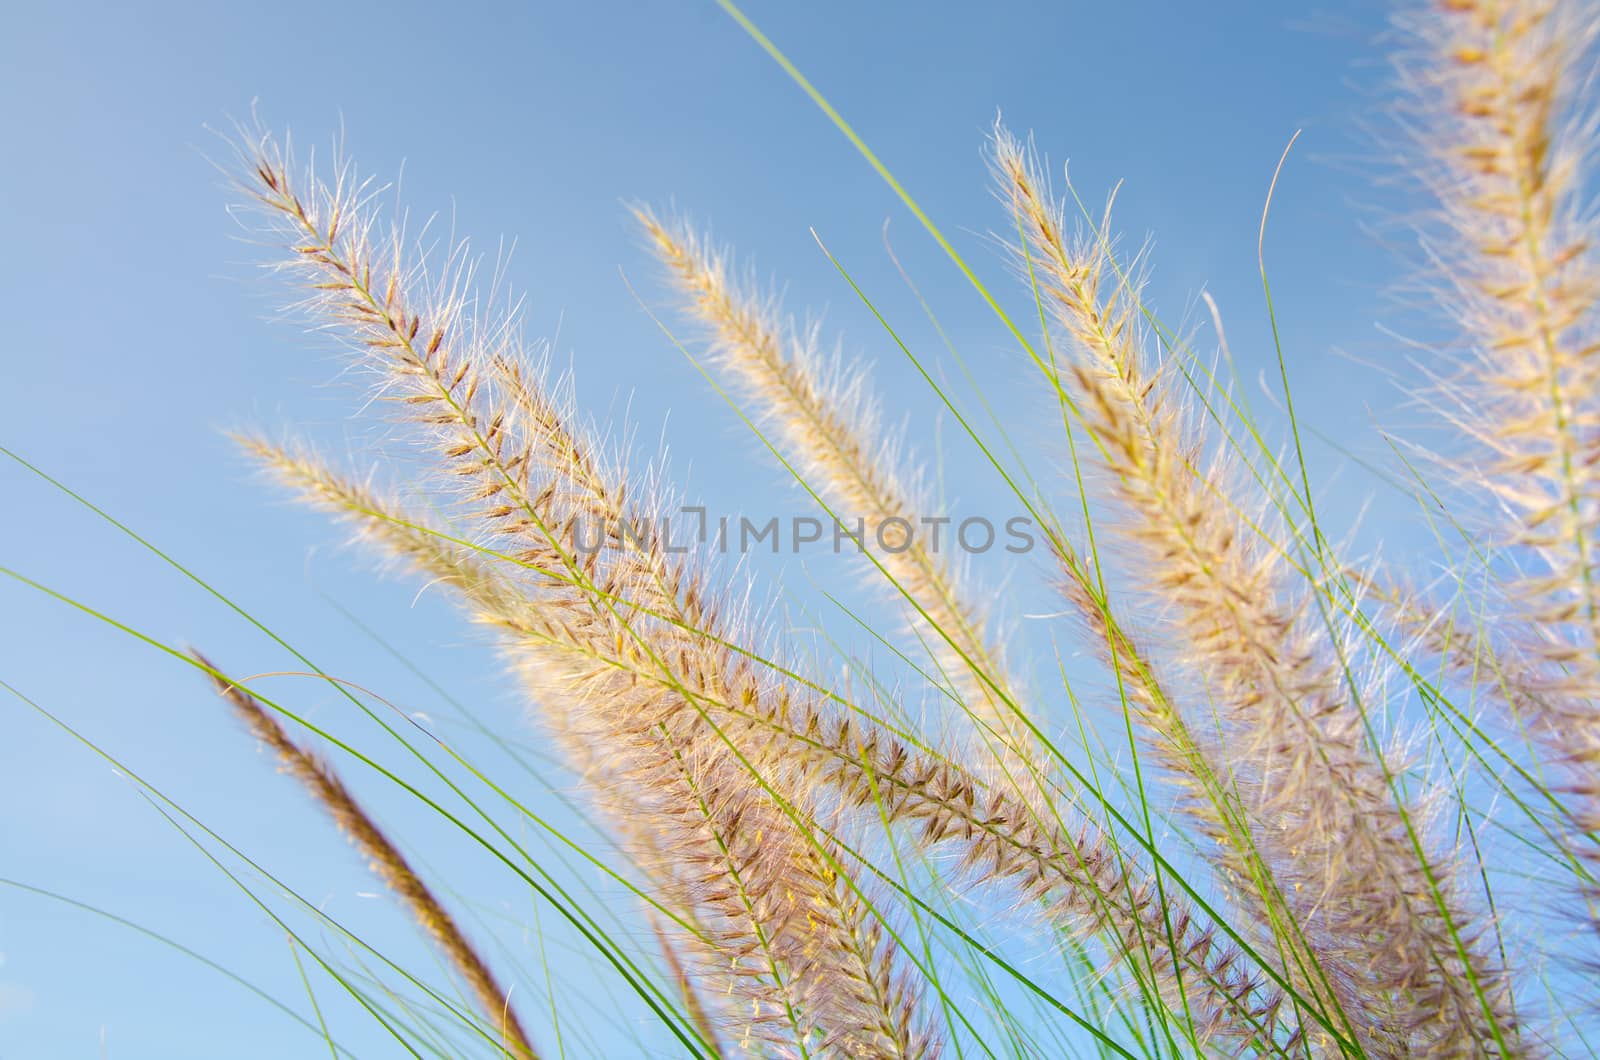 Grass Flower Sunset and Blue Sky by migrean